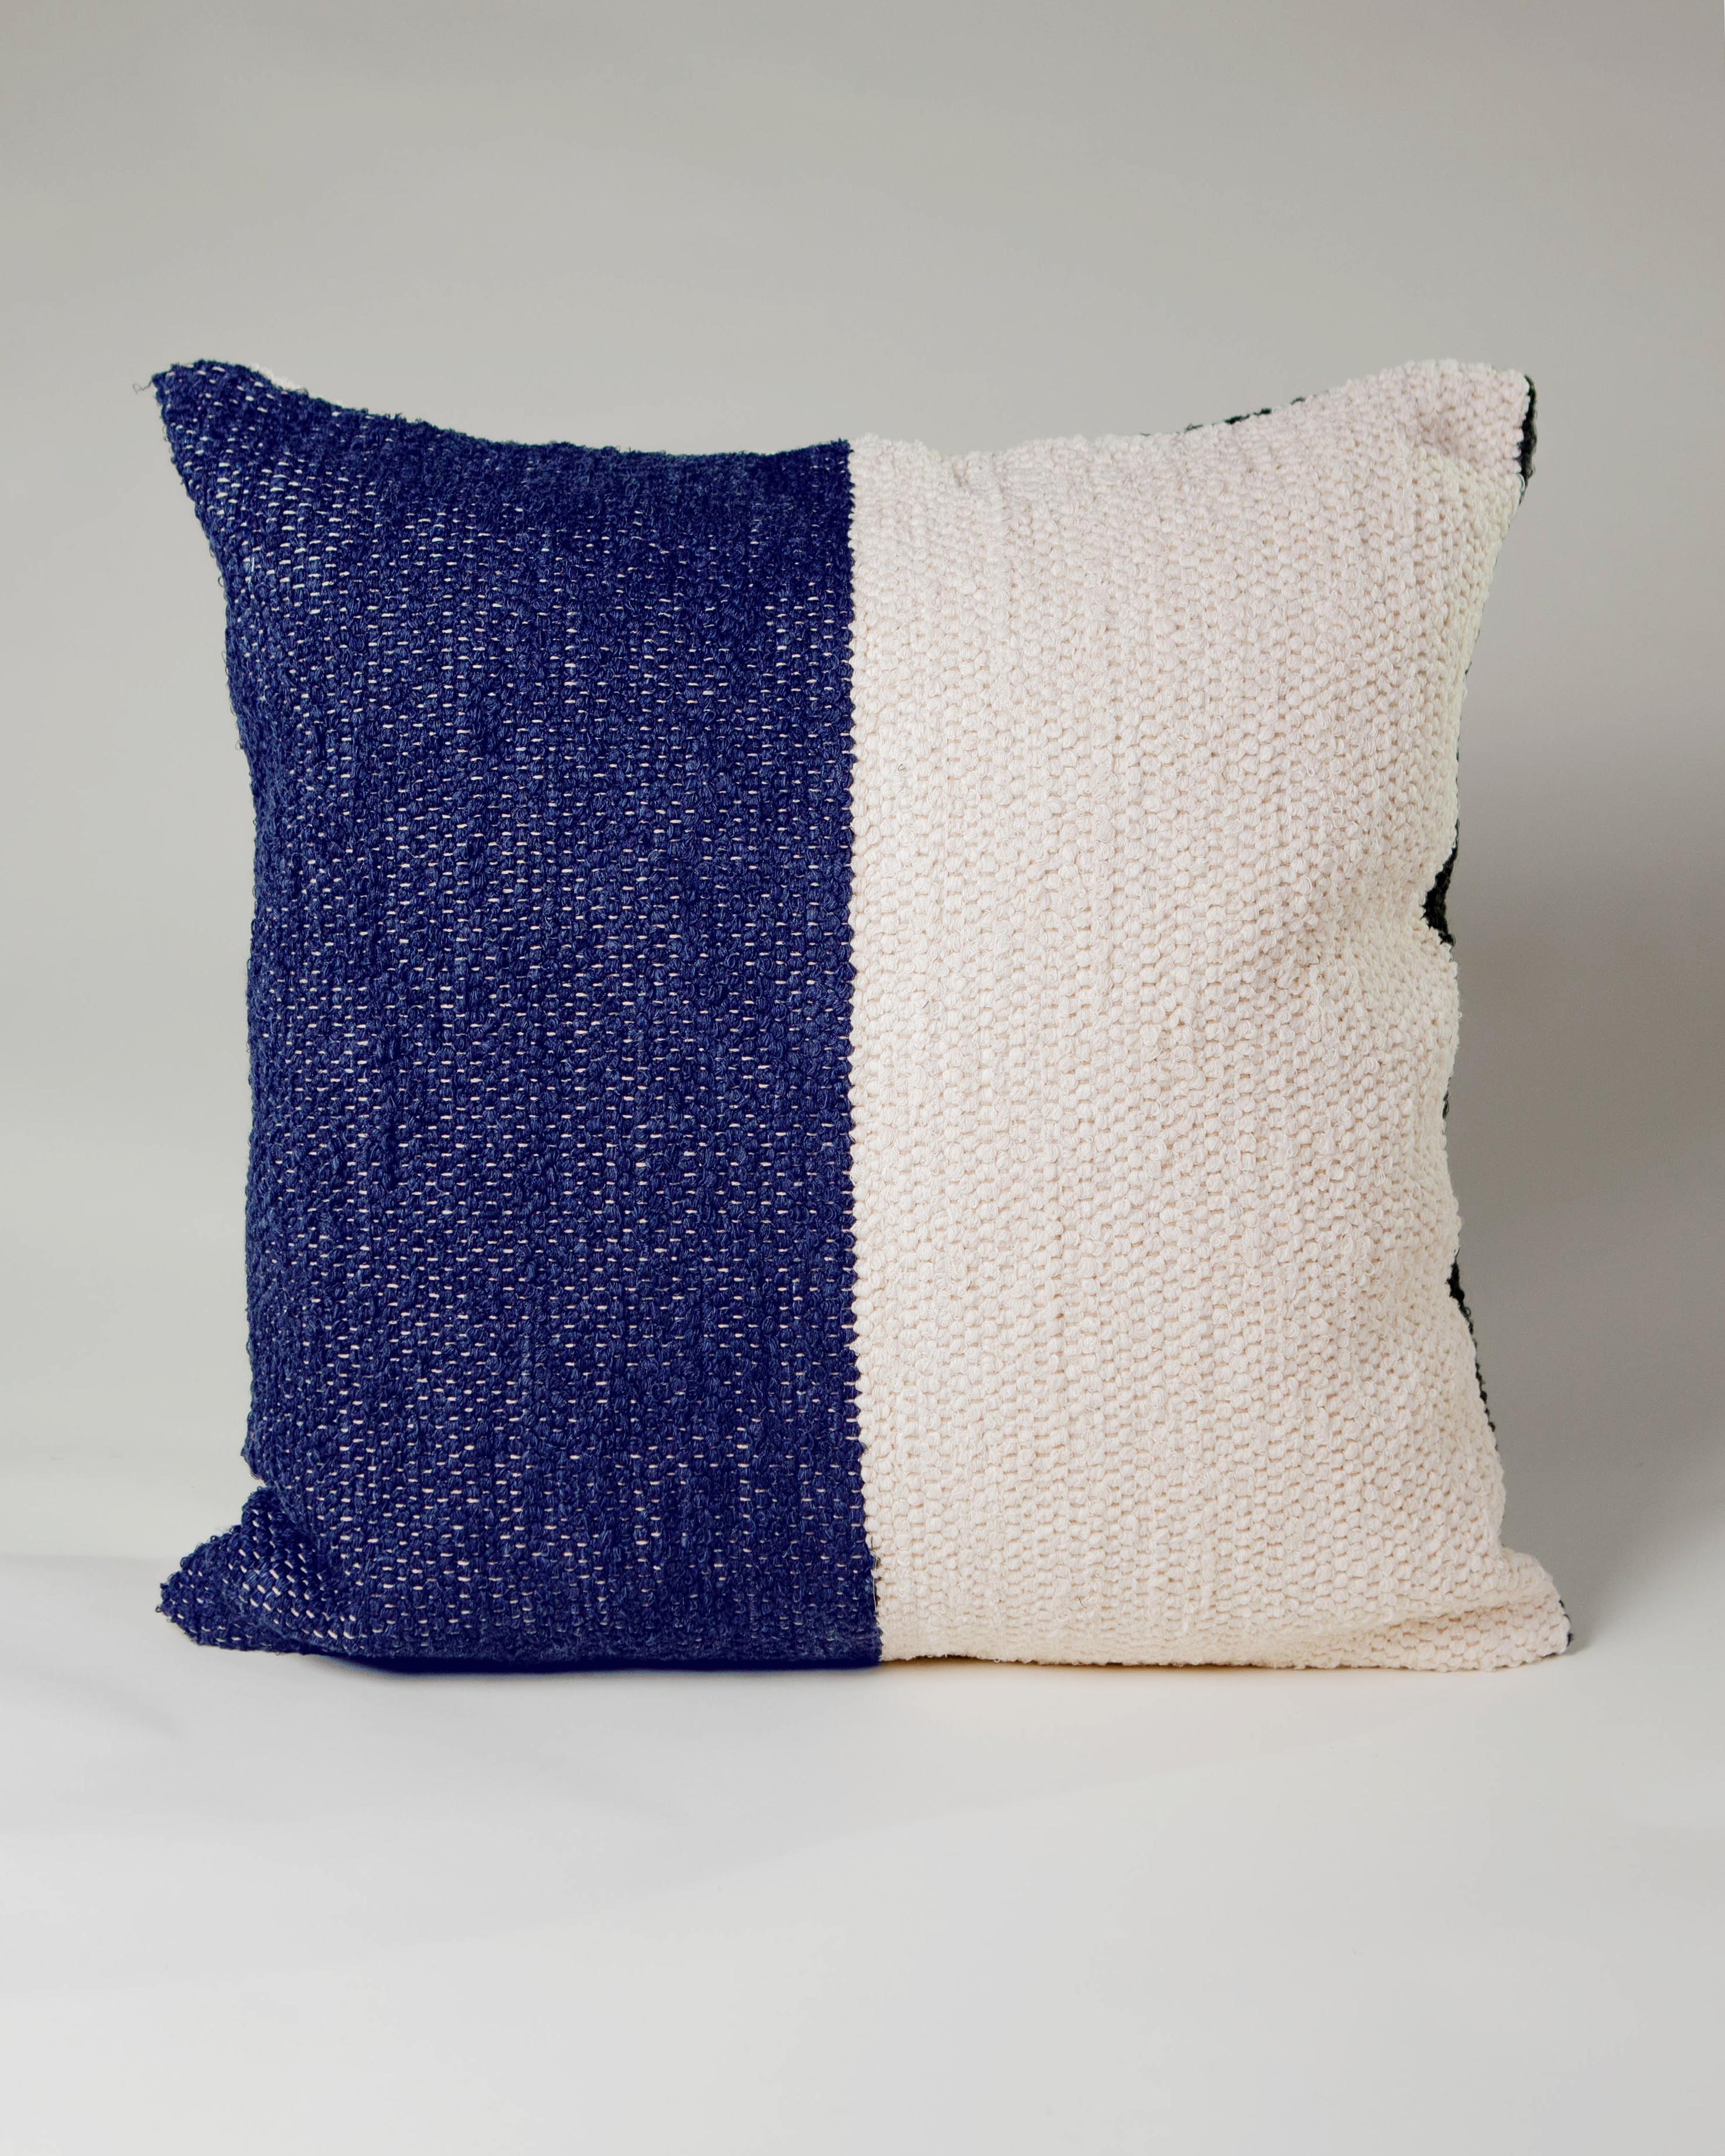 Organic Modern Casa Cubista Handwoven Cotton Navy and White Color Block Throw Pillow, in Stock For Sale